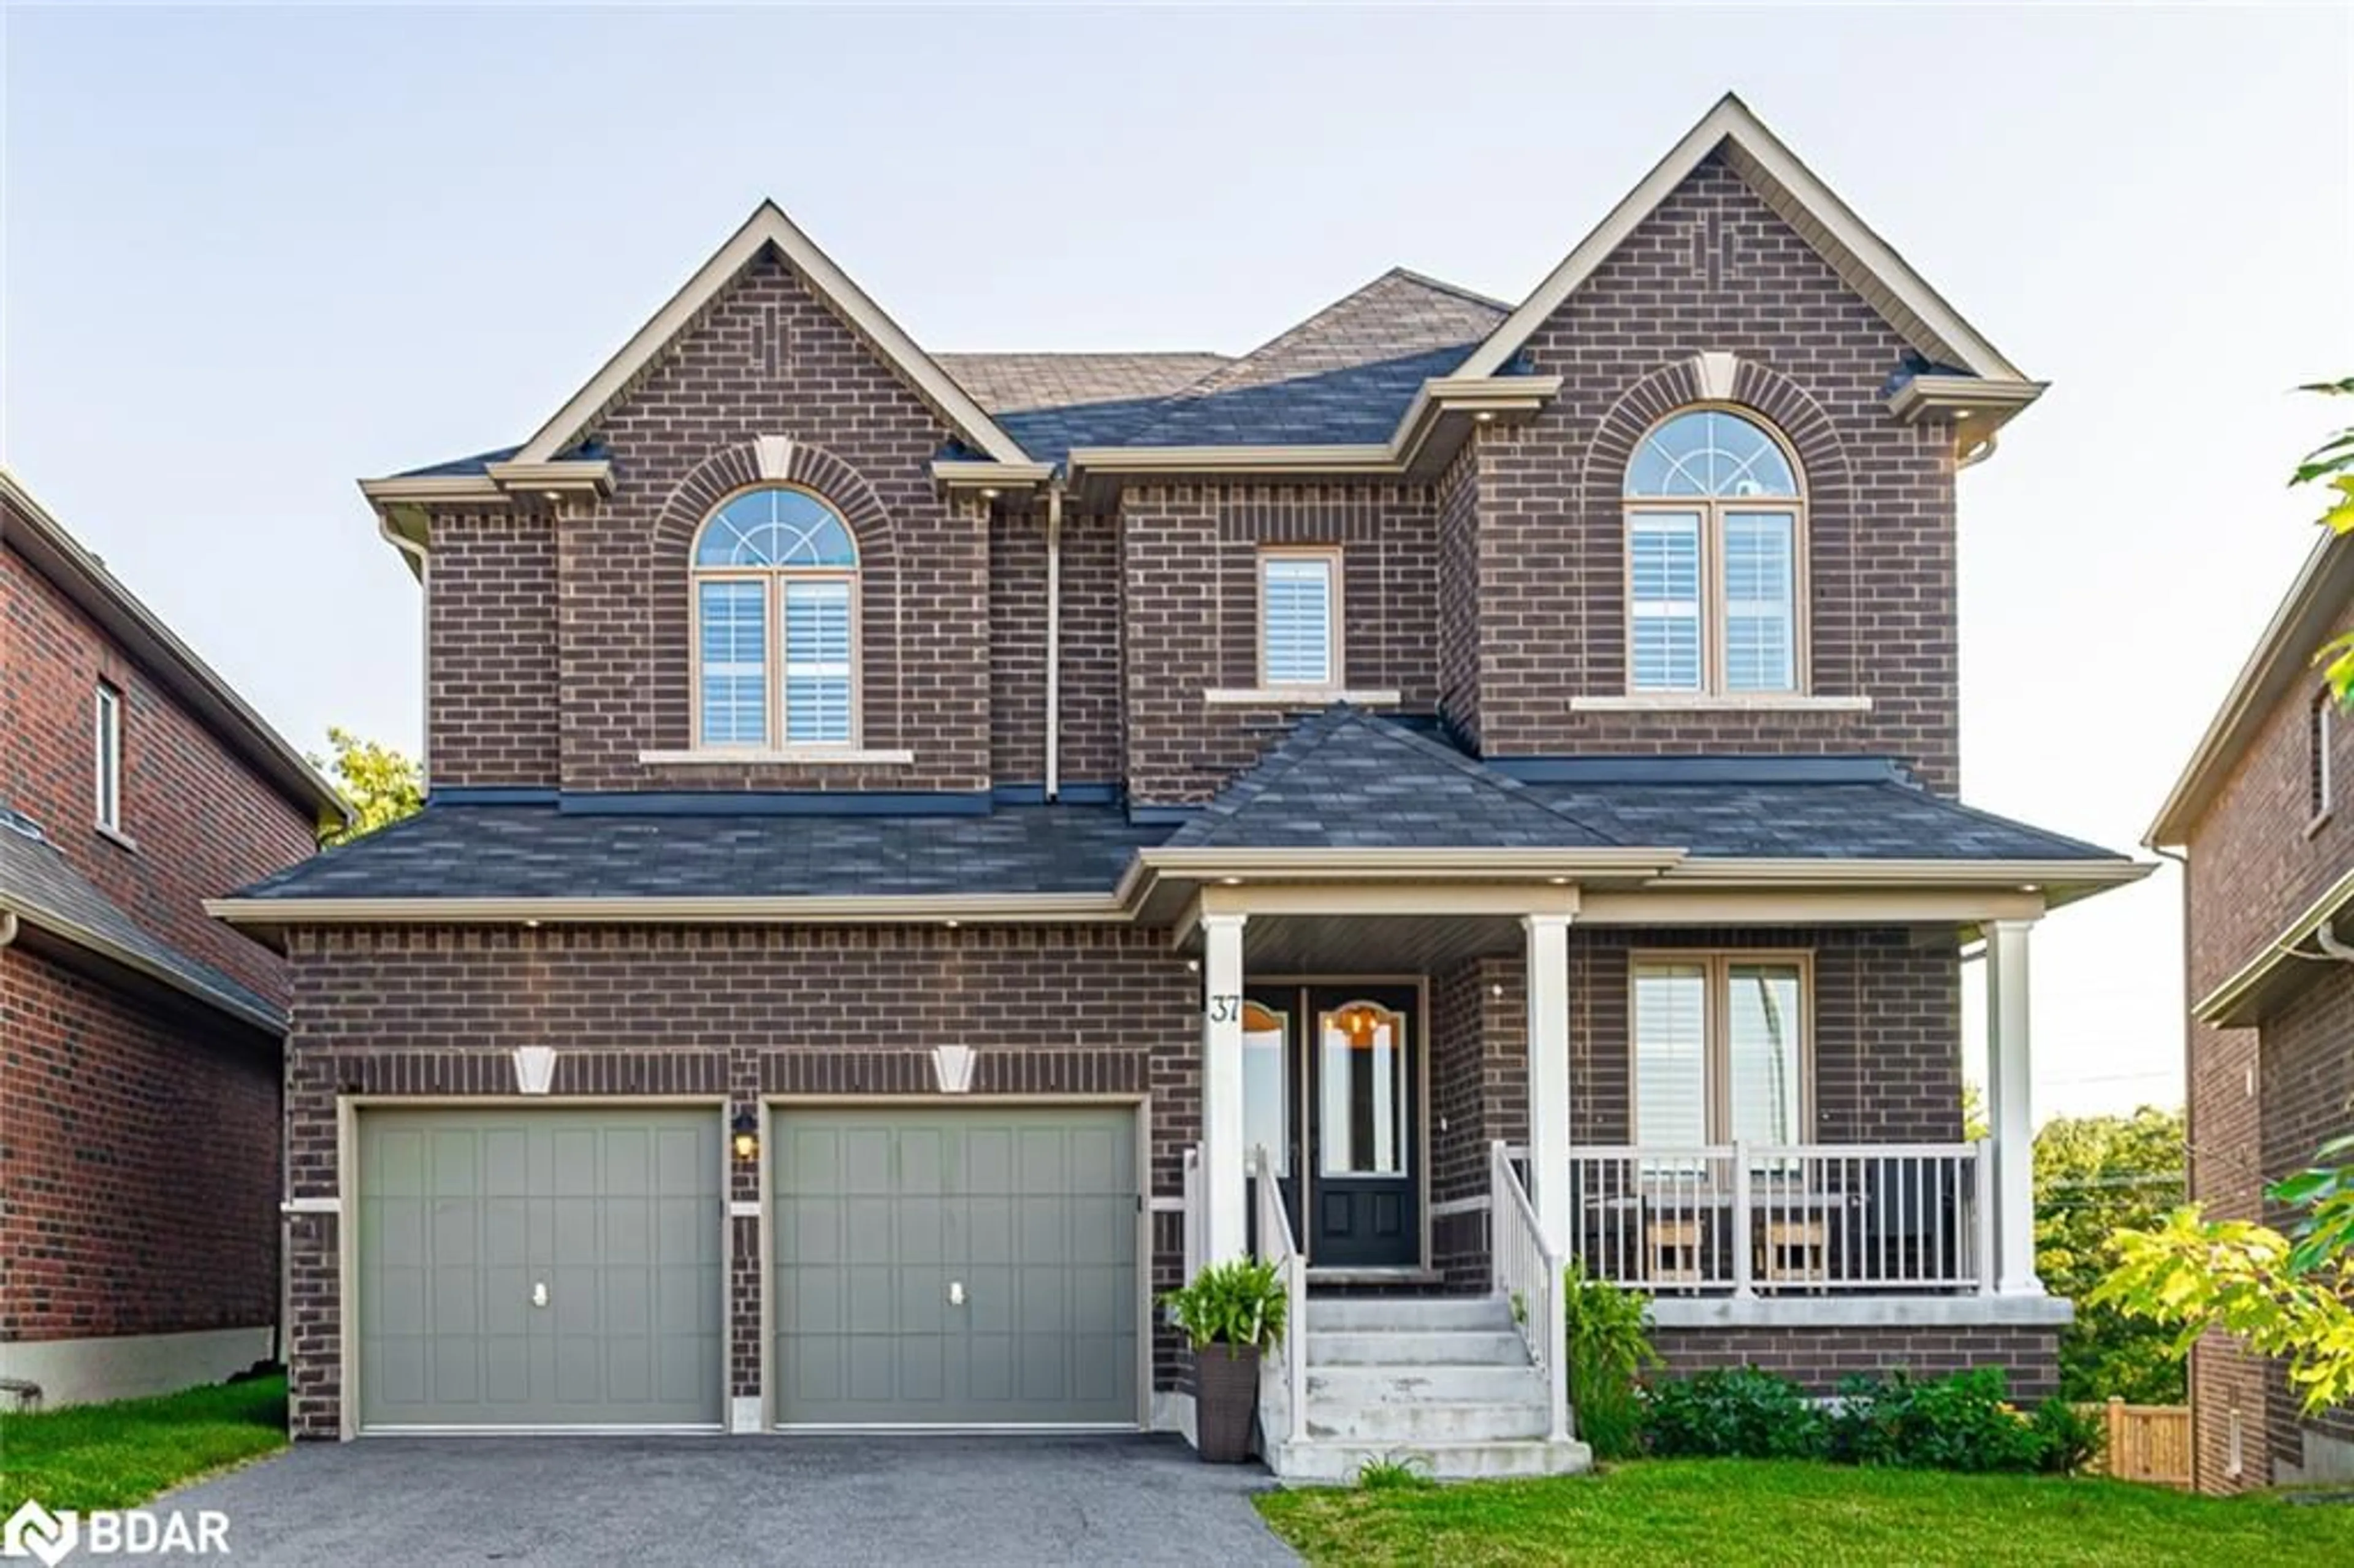 Home with brick exterior material for 37 Muirfield Drive Dr, Barrie Ontario L4N 5S4